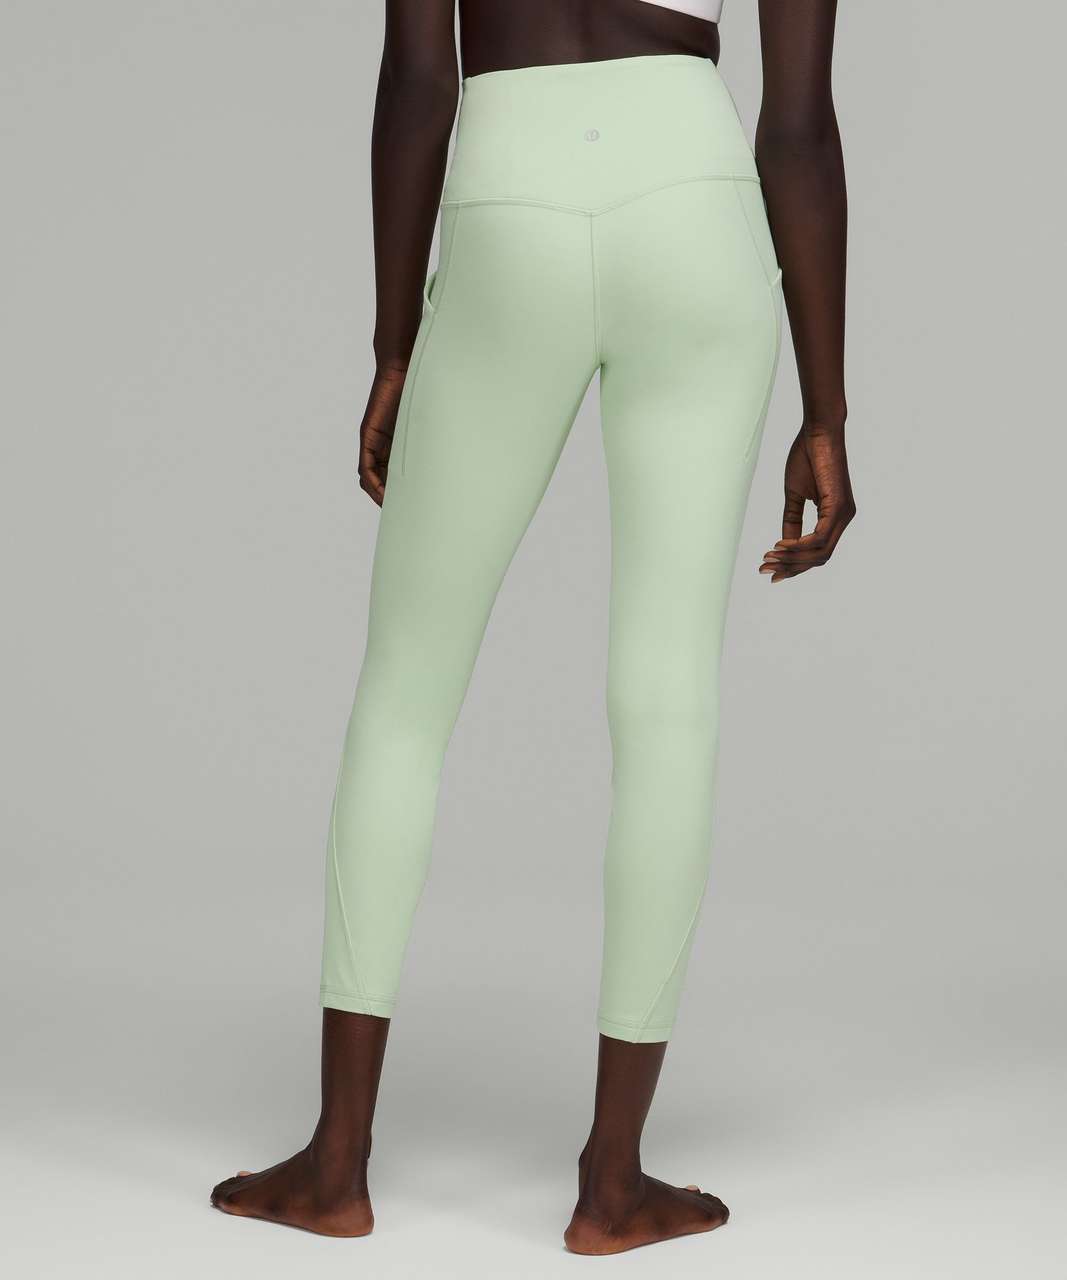 Lululemon Align High-Rise Pant with Pockets 25" - Creamy Mint